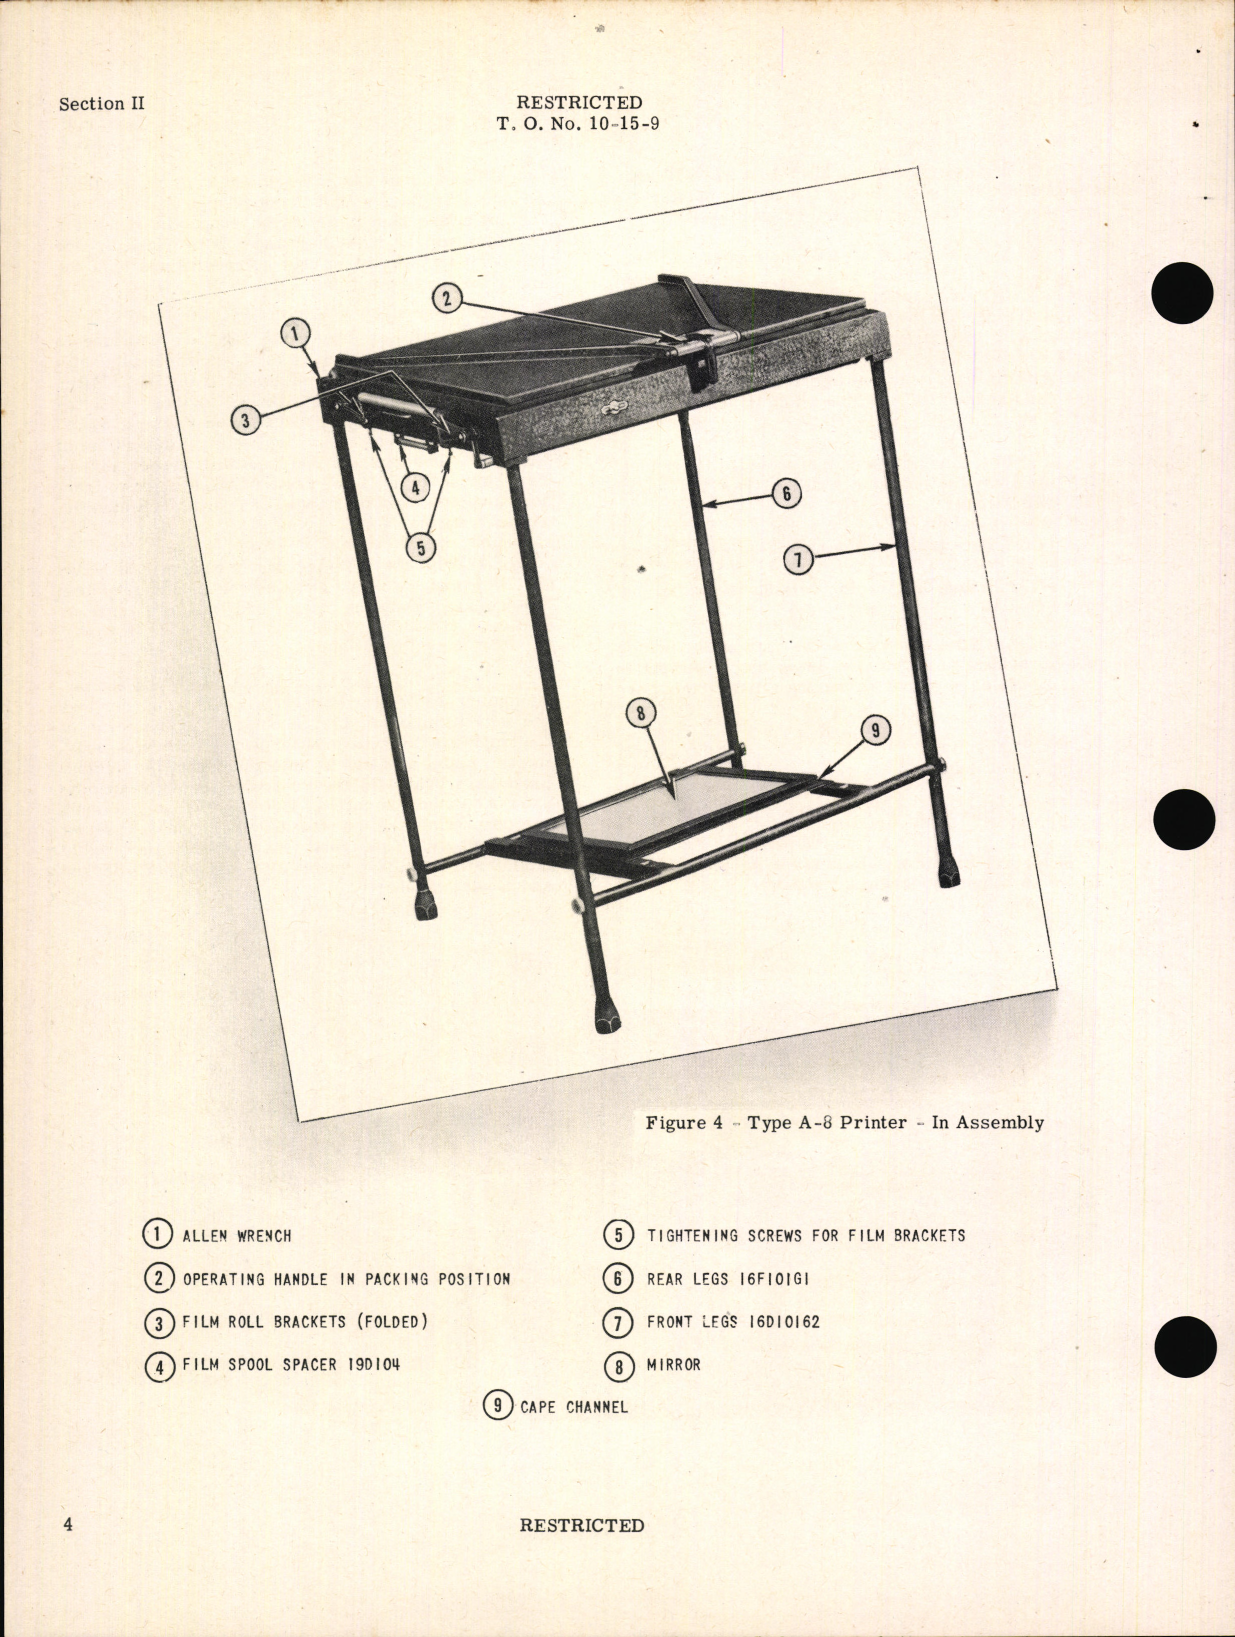 Sample page 8 from AirCorps Library document: Handbook of Instructions with Parts Catalog for Type A-8 Contact Printer for Type A Portable Laboratories